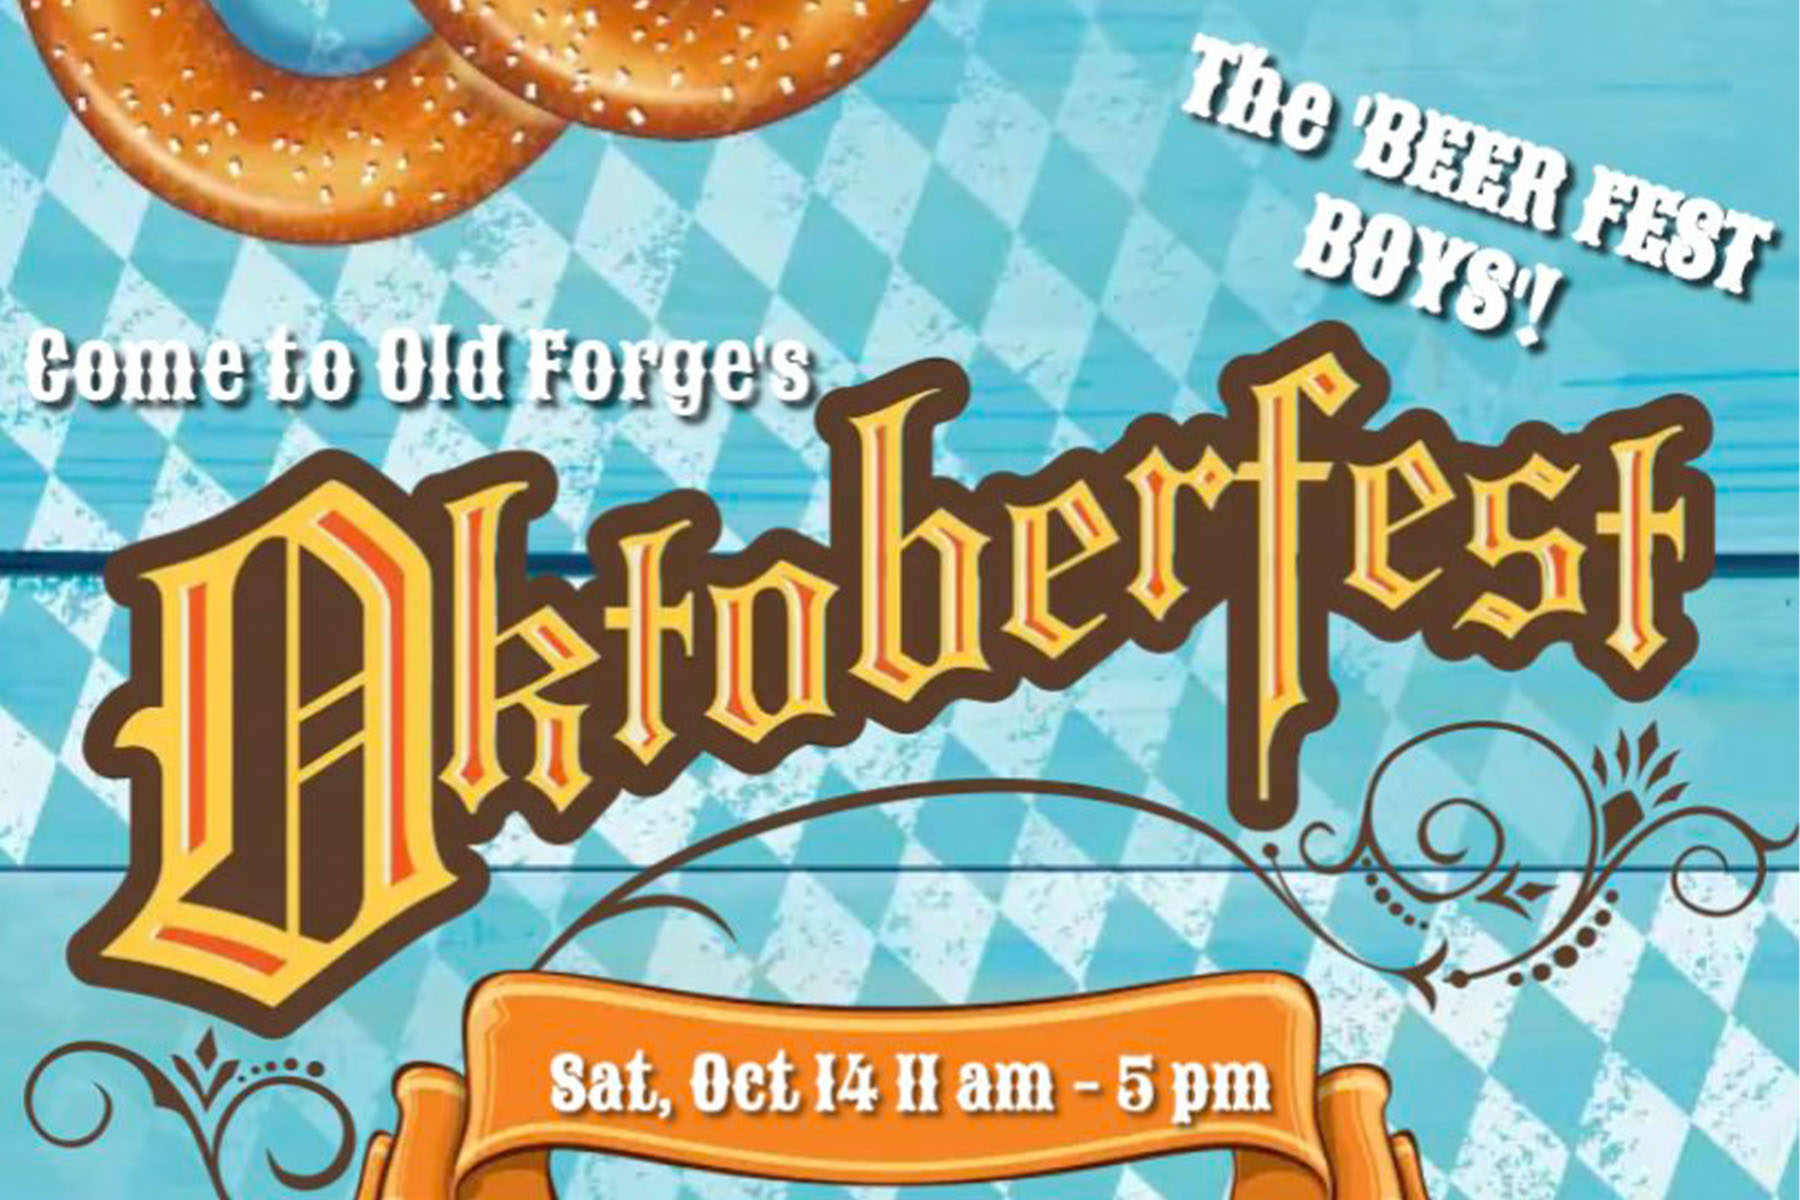 Oktoberfest in Old Forge, NY